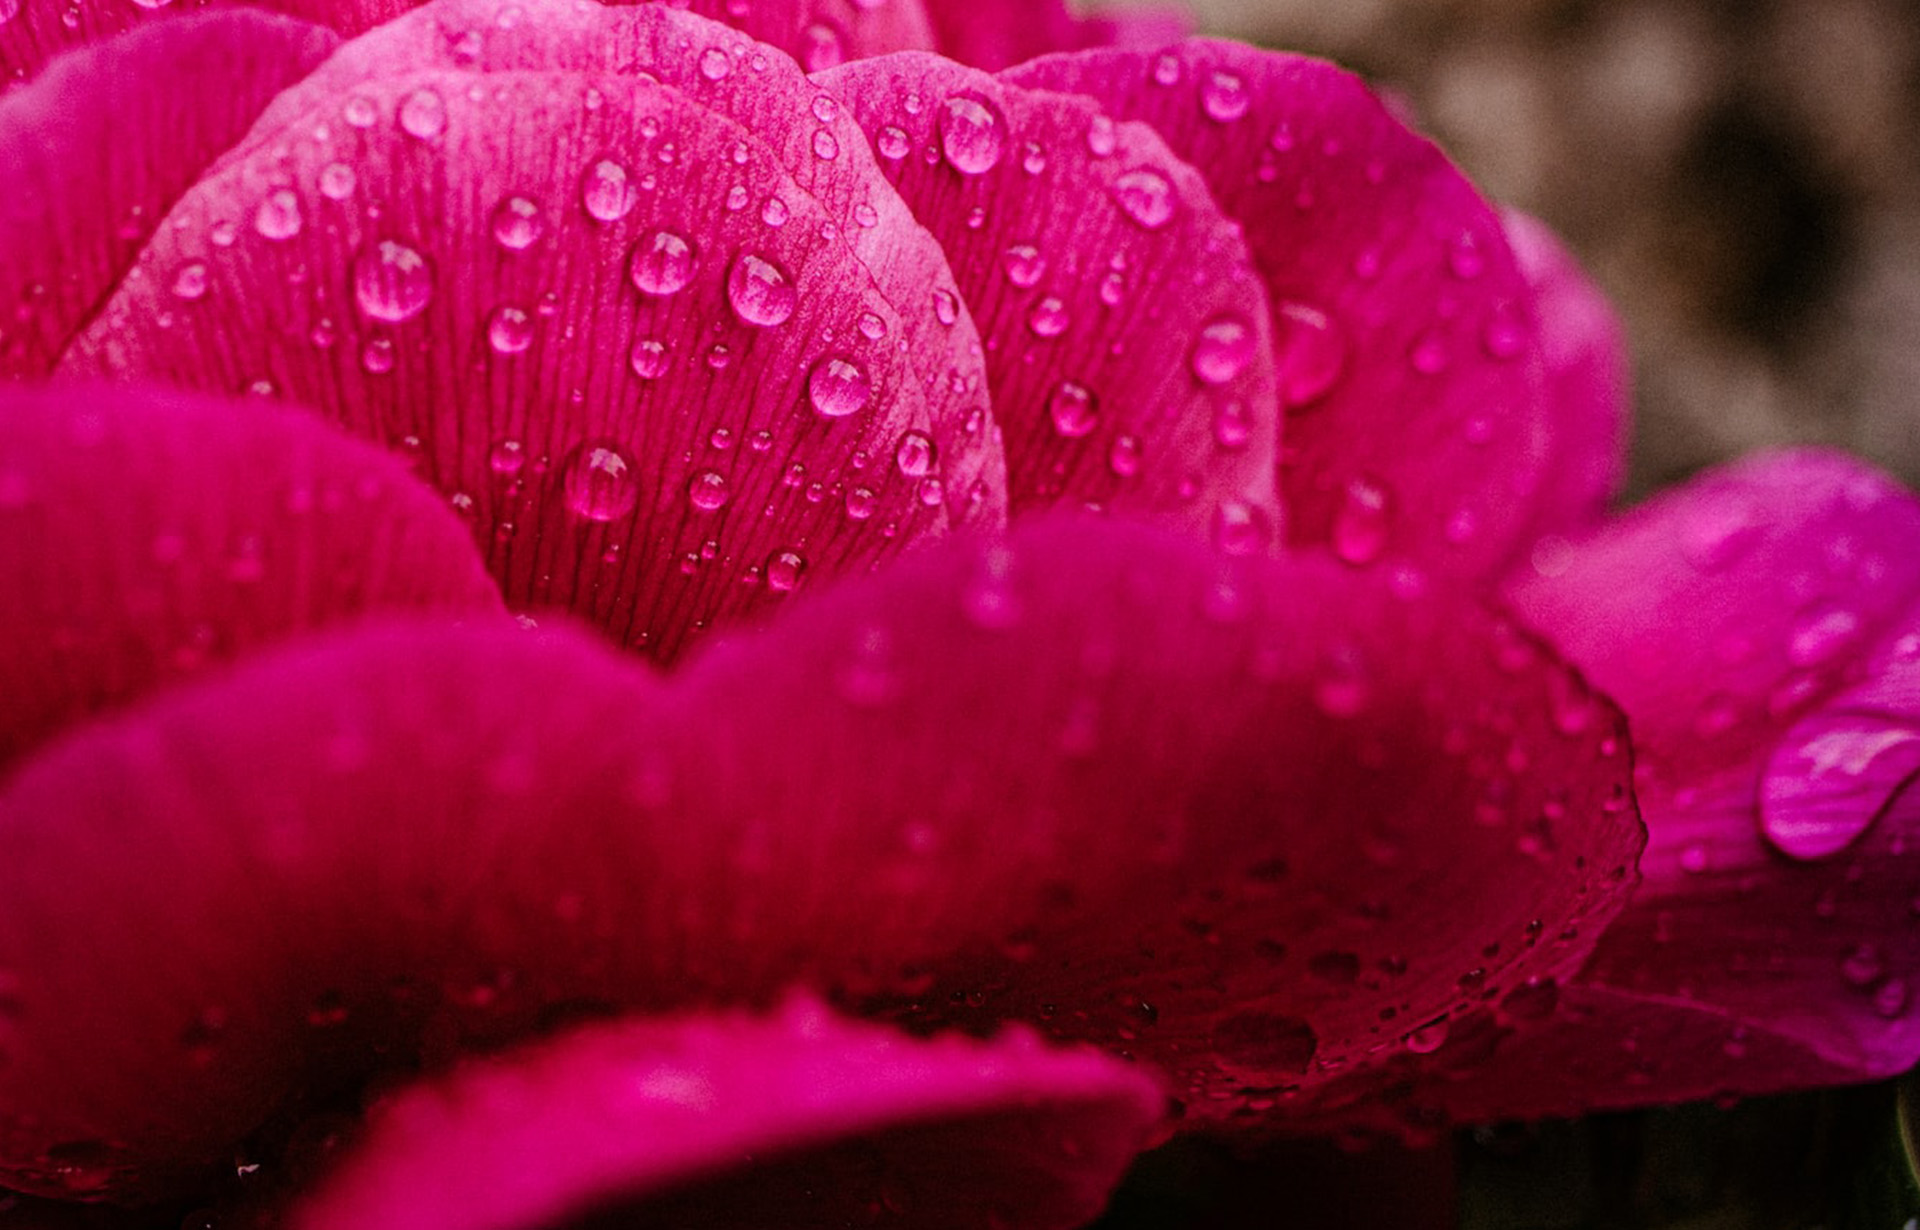 Magenta Flower Petals - Header Image for the Color of the Year Blog Post